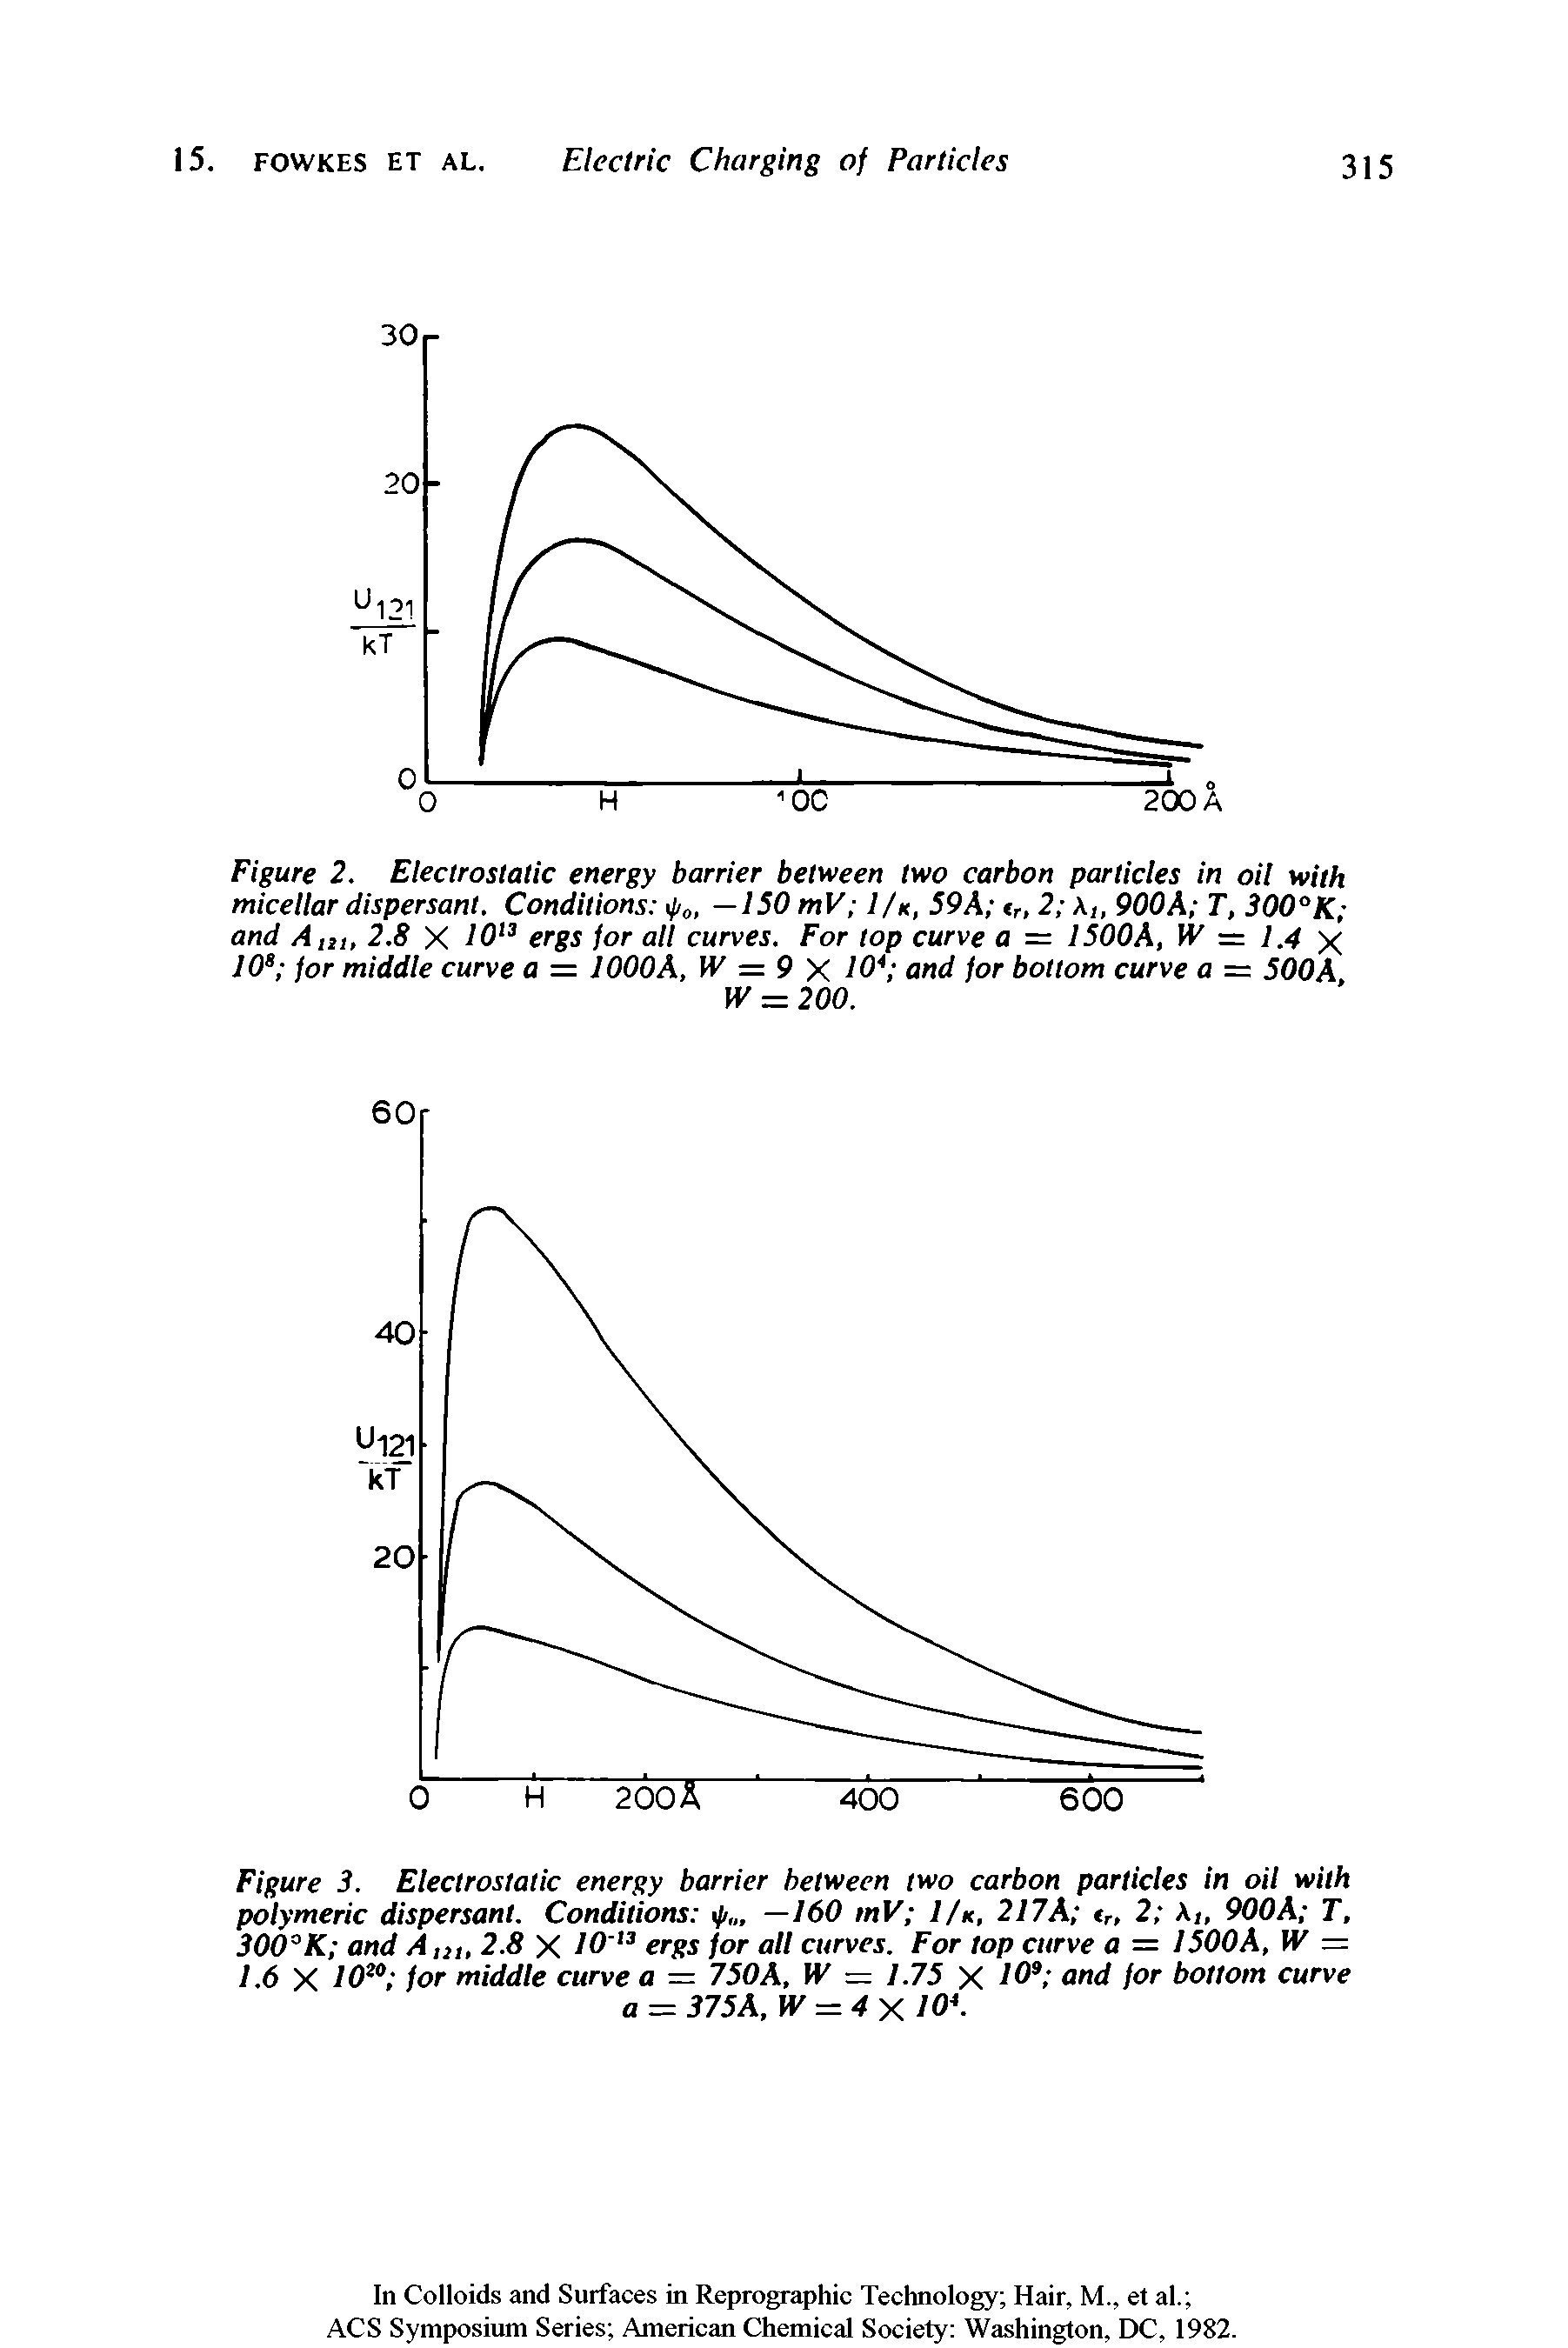 Figure 2. Electrostatic energy barrier between two carbon particles in oil with micellar dispersant. Conditions ip0, —ISO mV 1/k, 59A <r, 2 A, 900A T, 300°K and A,n, 2.8 X 1013 ergs for all curves. For top curve a = 1500A, W = 1.4 x 10s for middle curve a = 1000A, W = 9 X 10 and for bottom curve a = 500A...